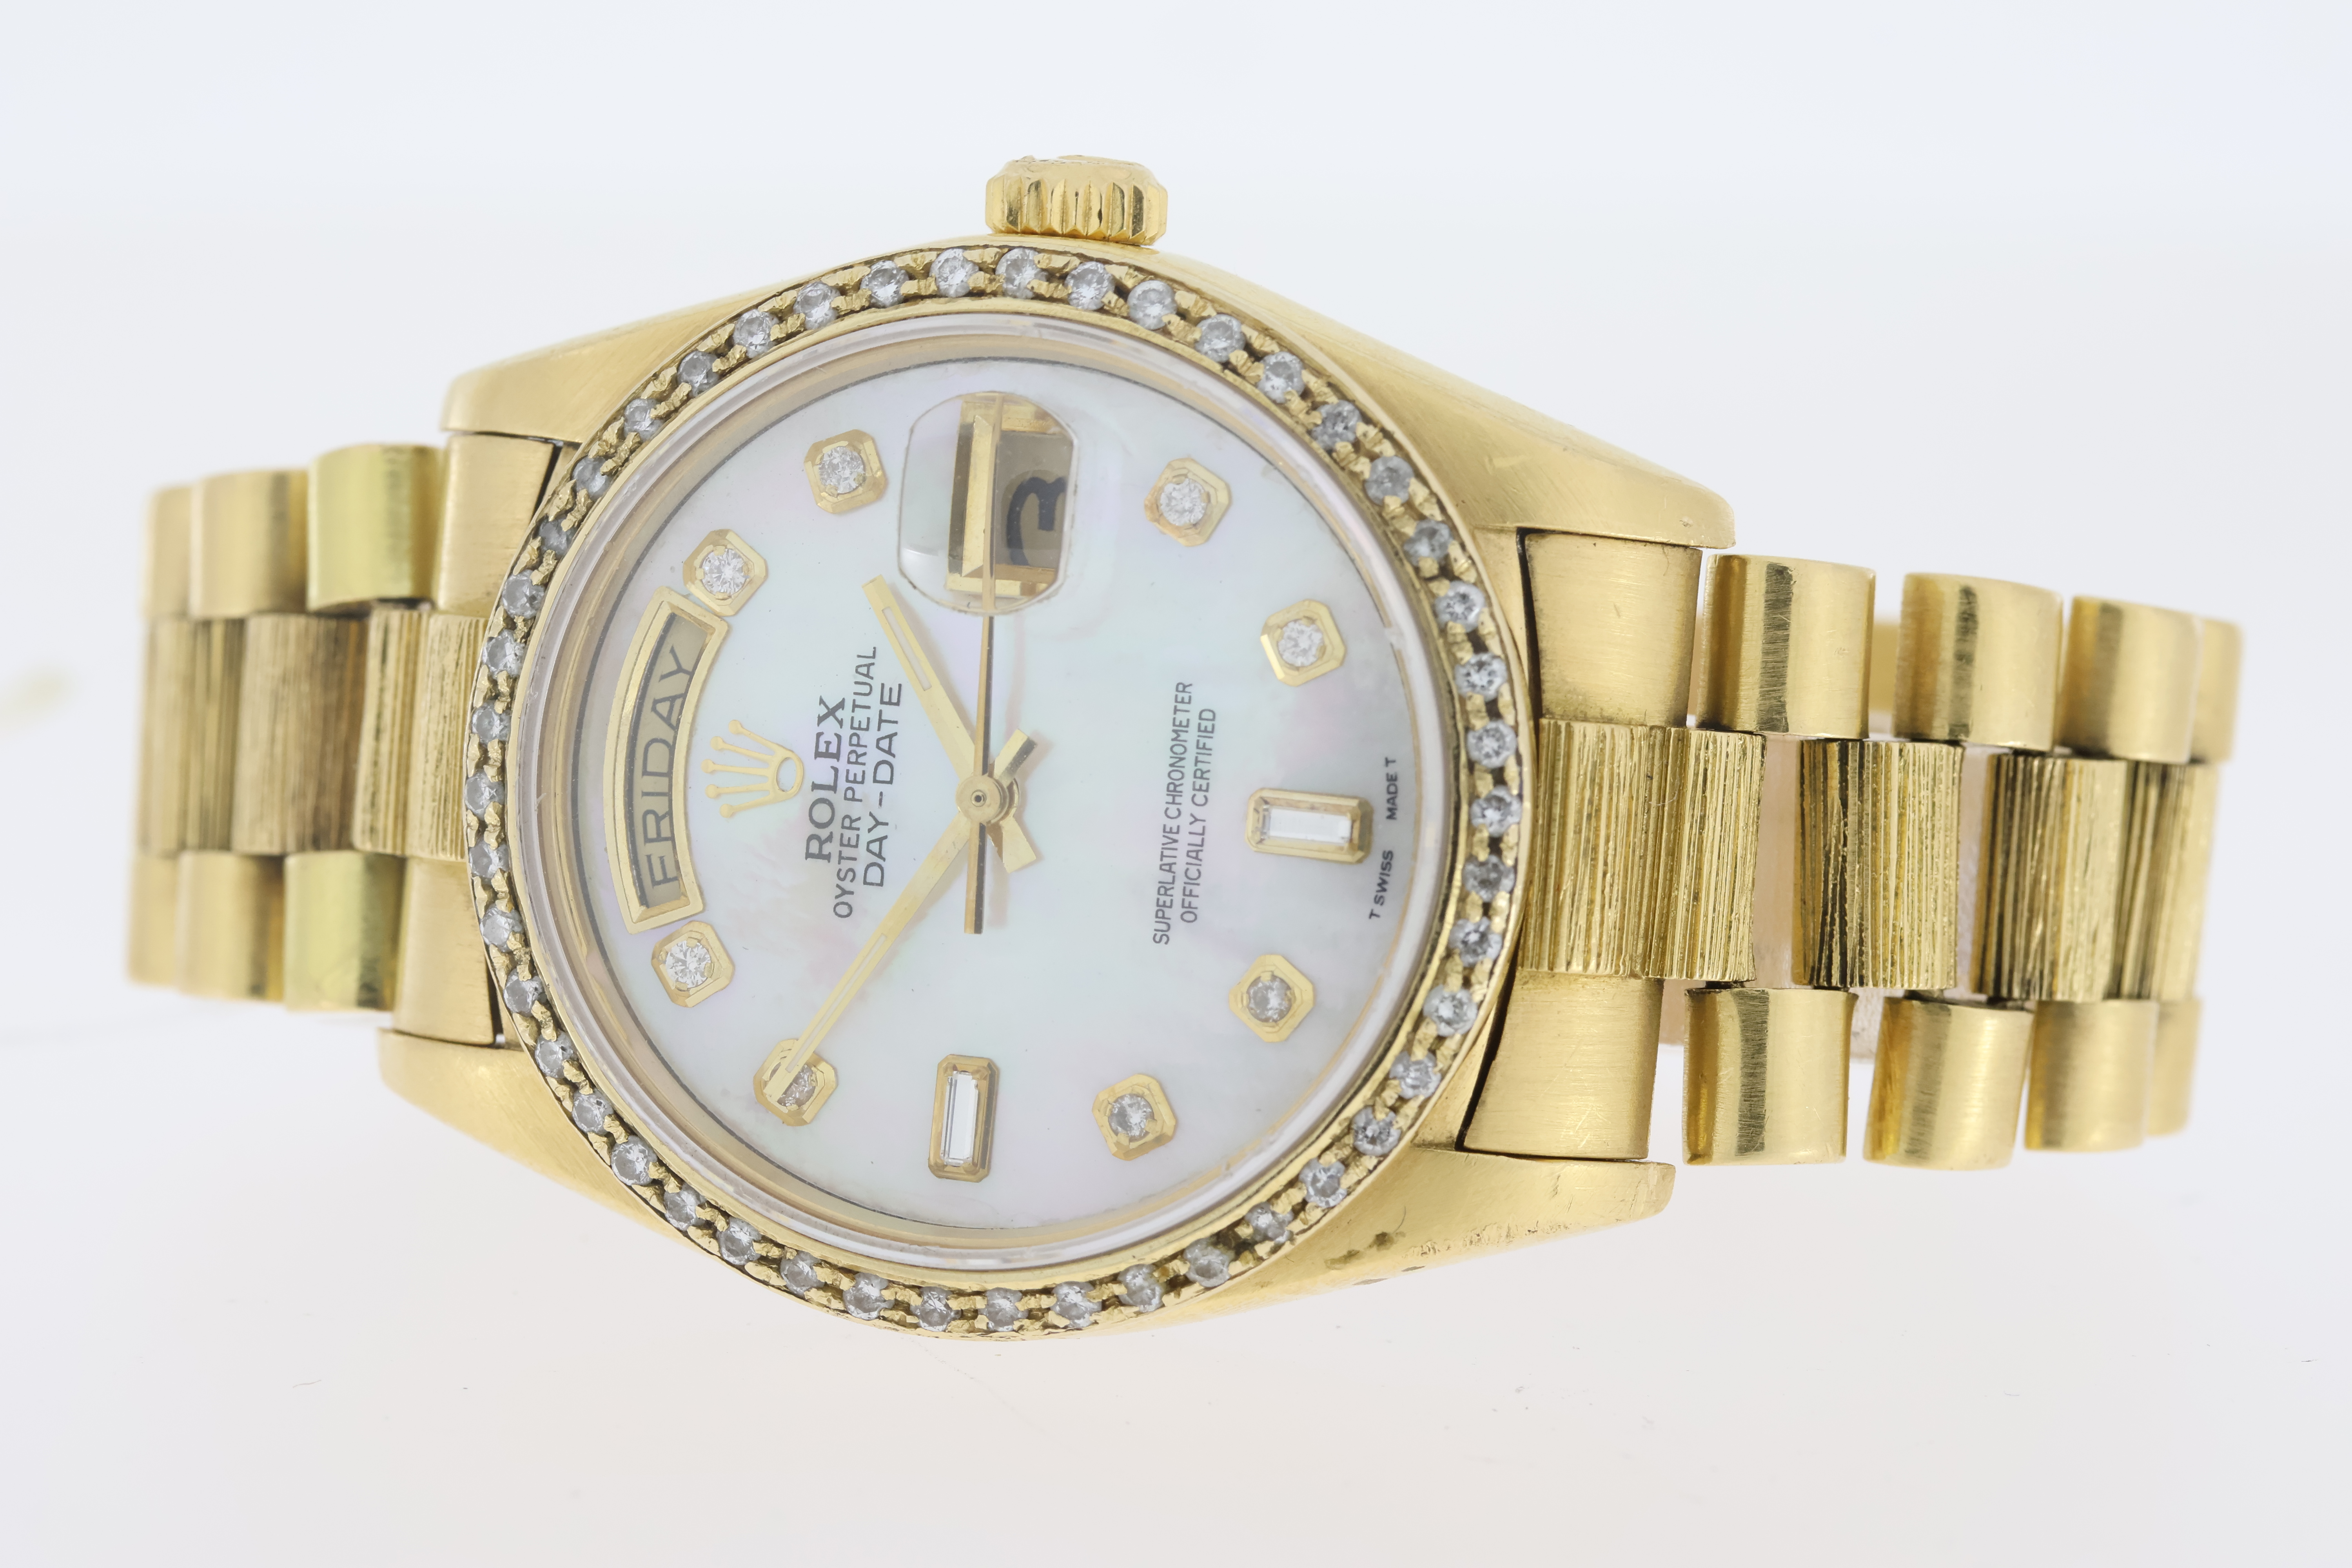 Rolex Day Date 36 Reference 18078 18ct Yellow Gold - Image 2 of 4